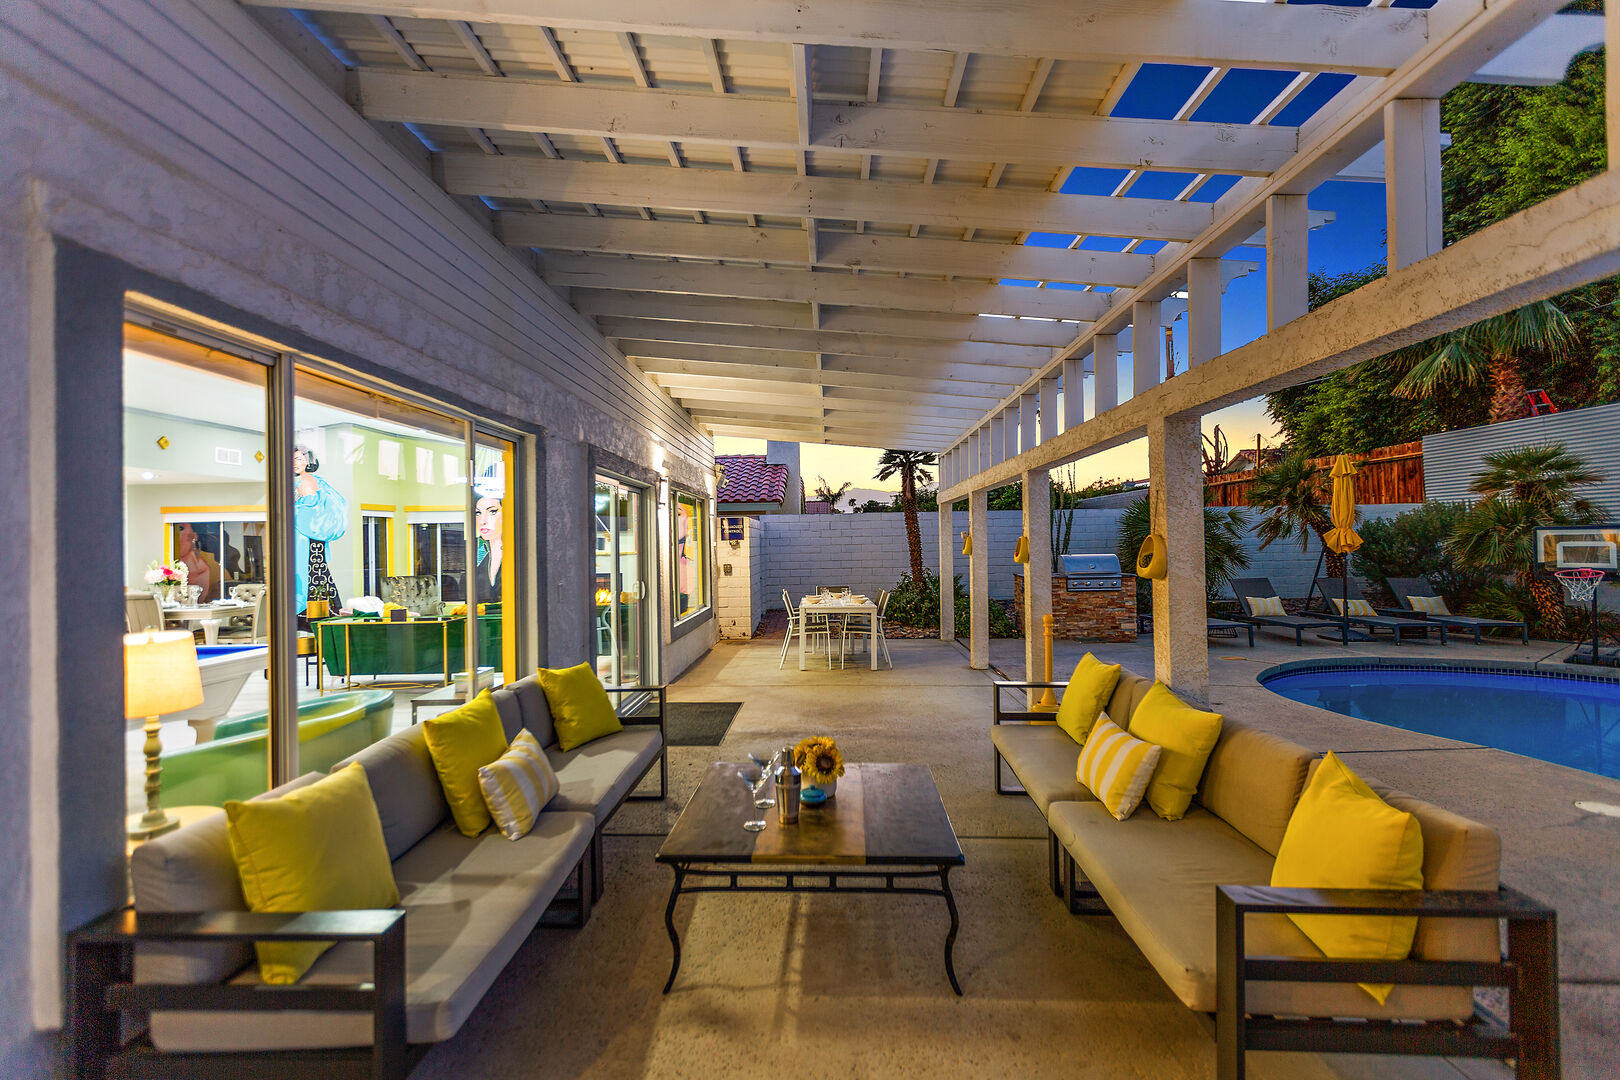 Enjoy the outdoor lounge seating for eight.